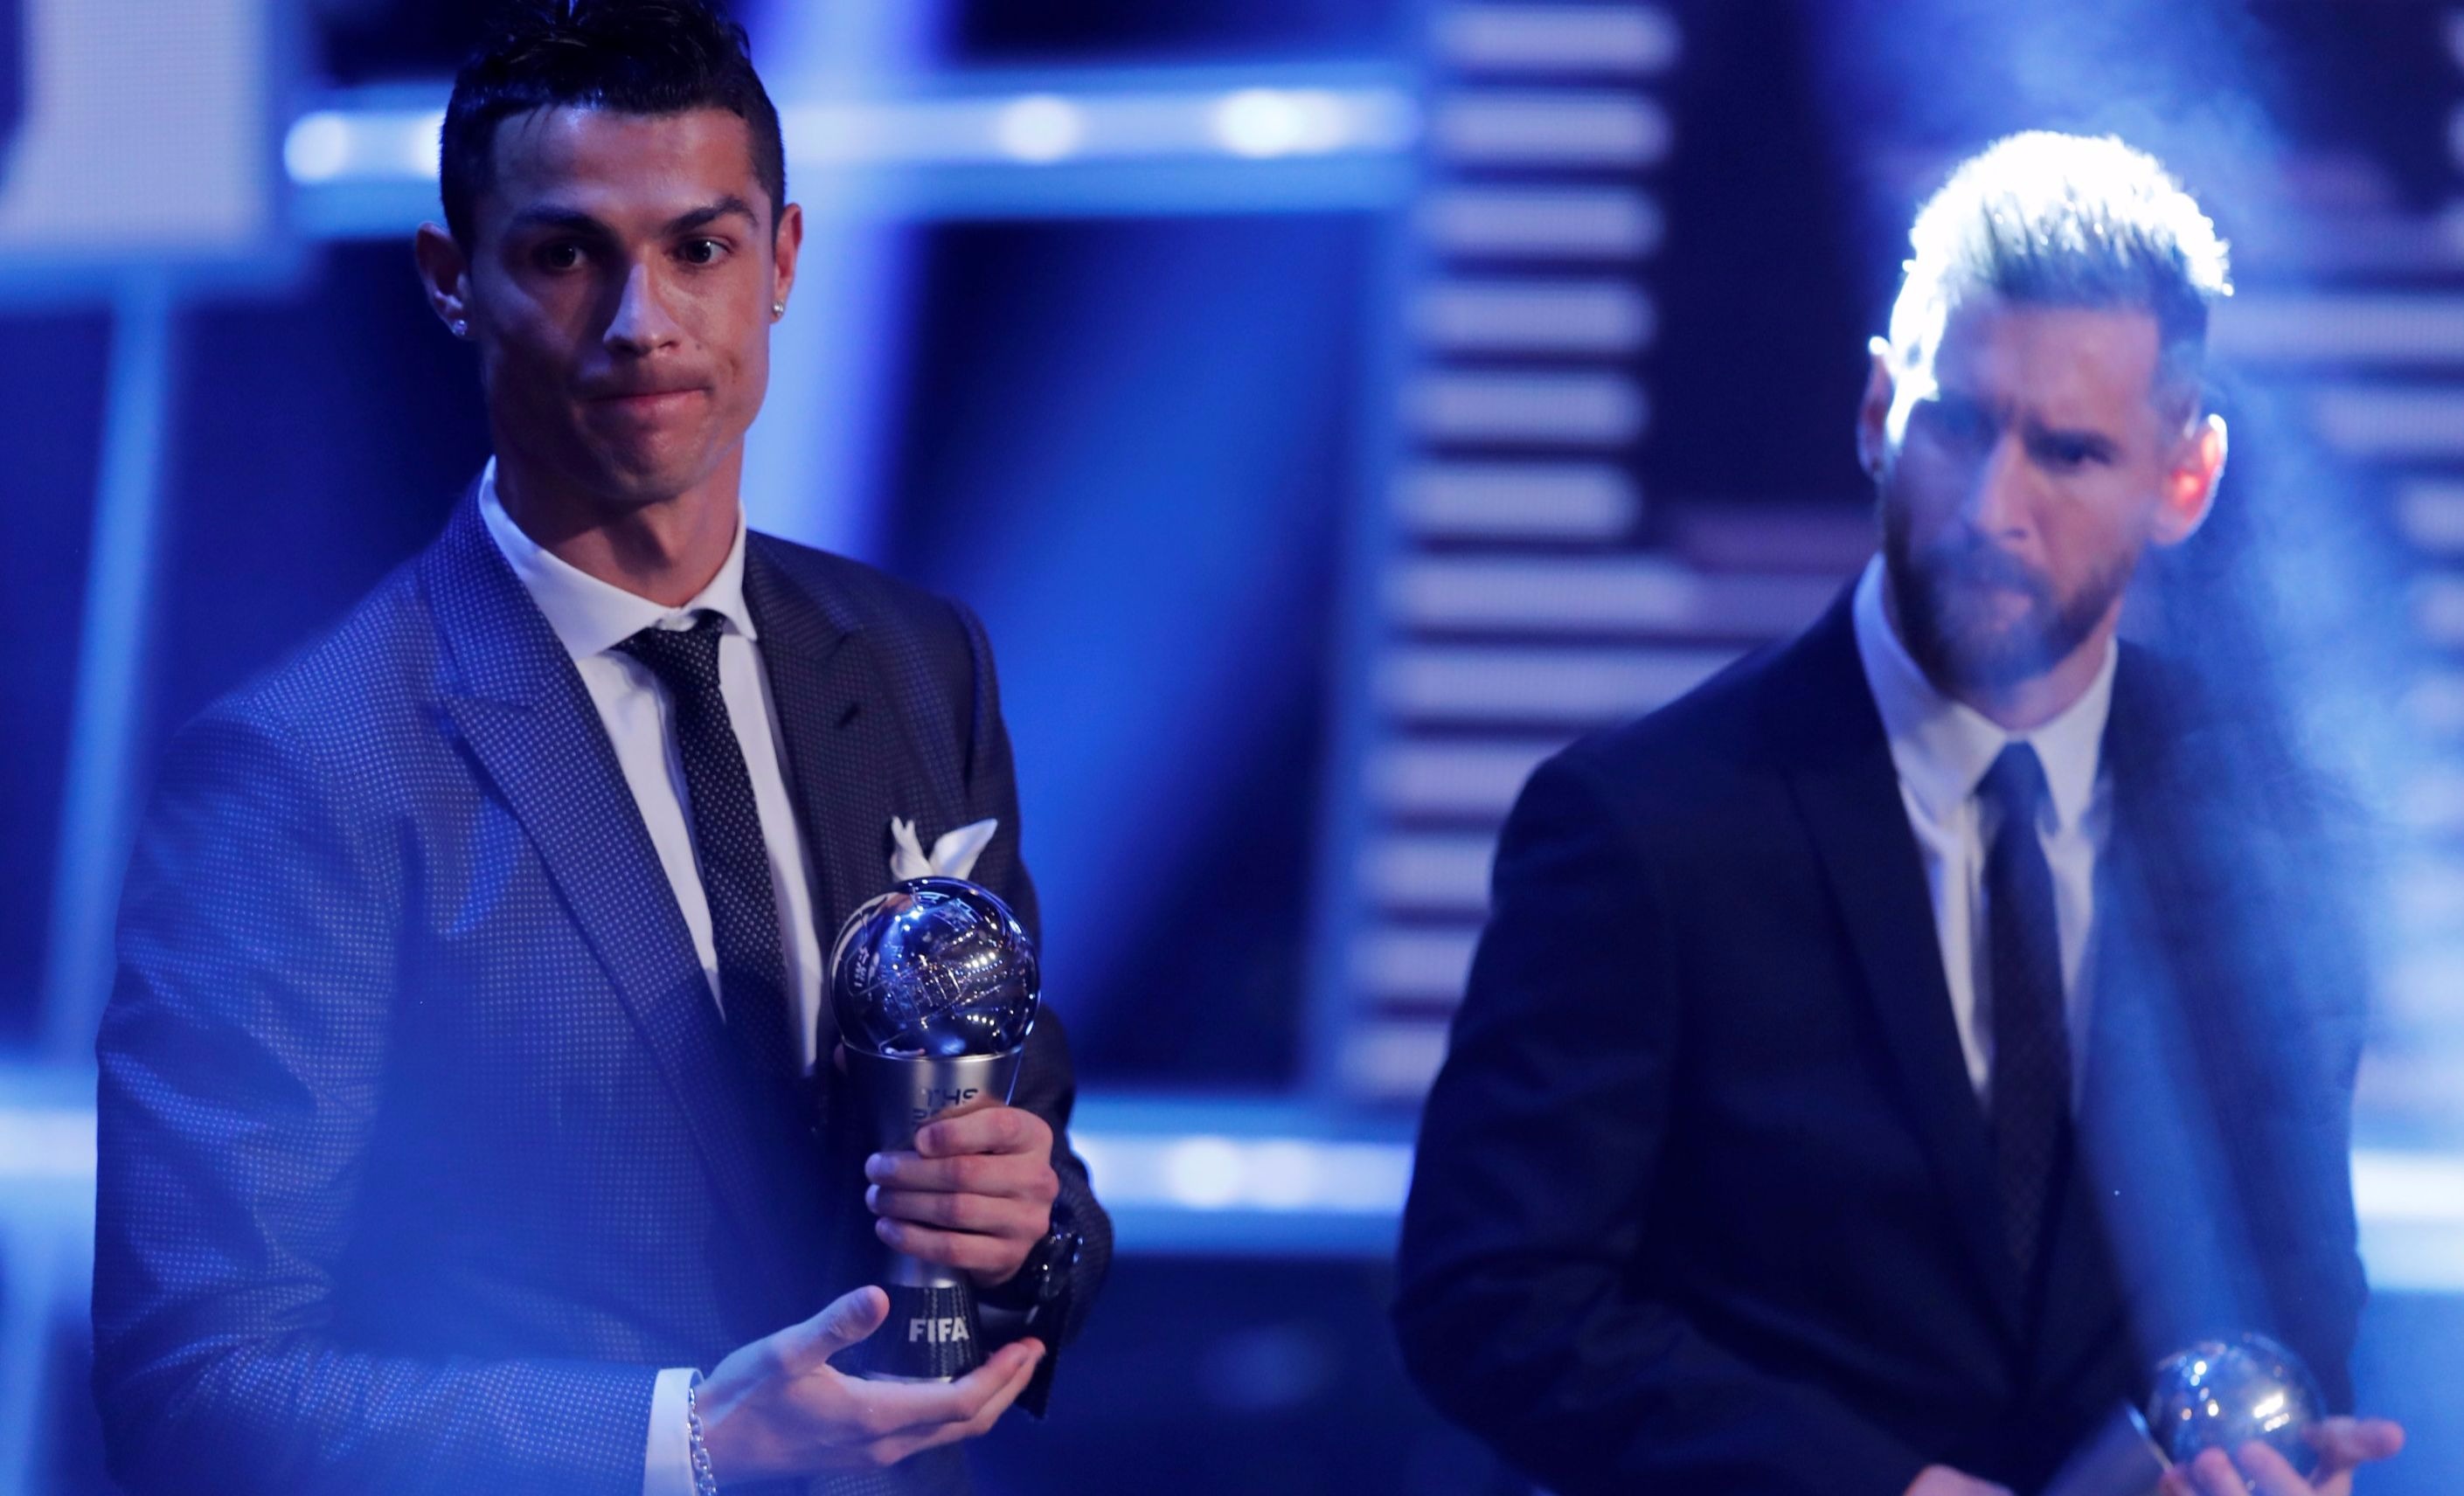 Real Madrid’s Cristiano Ronaldo and Barcelona’s Lionel Messi after being selected in the FIFA FIFPro World 11 during the awards.